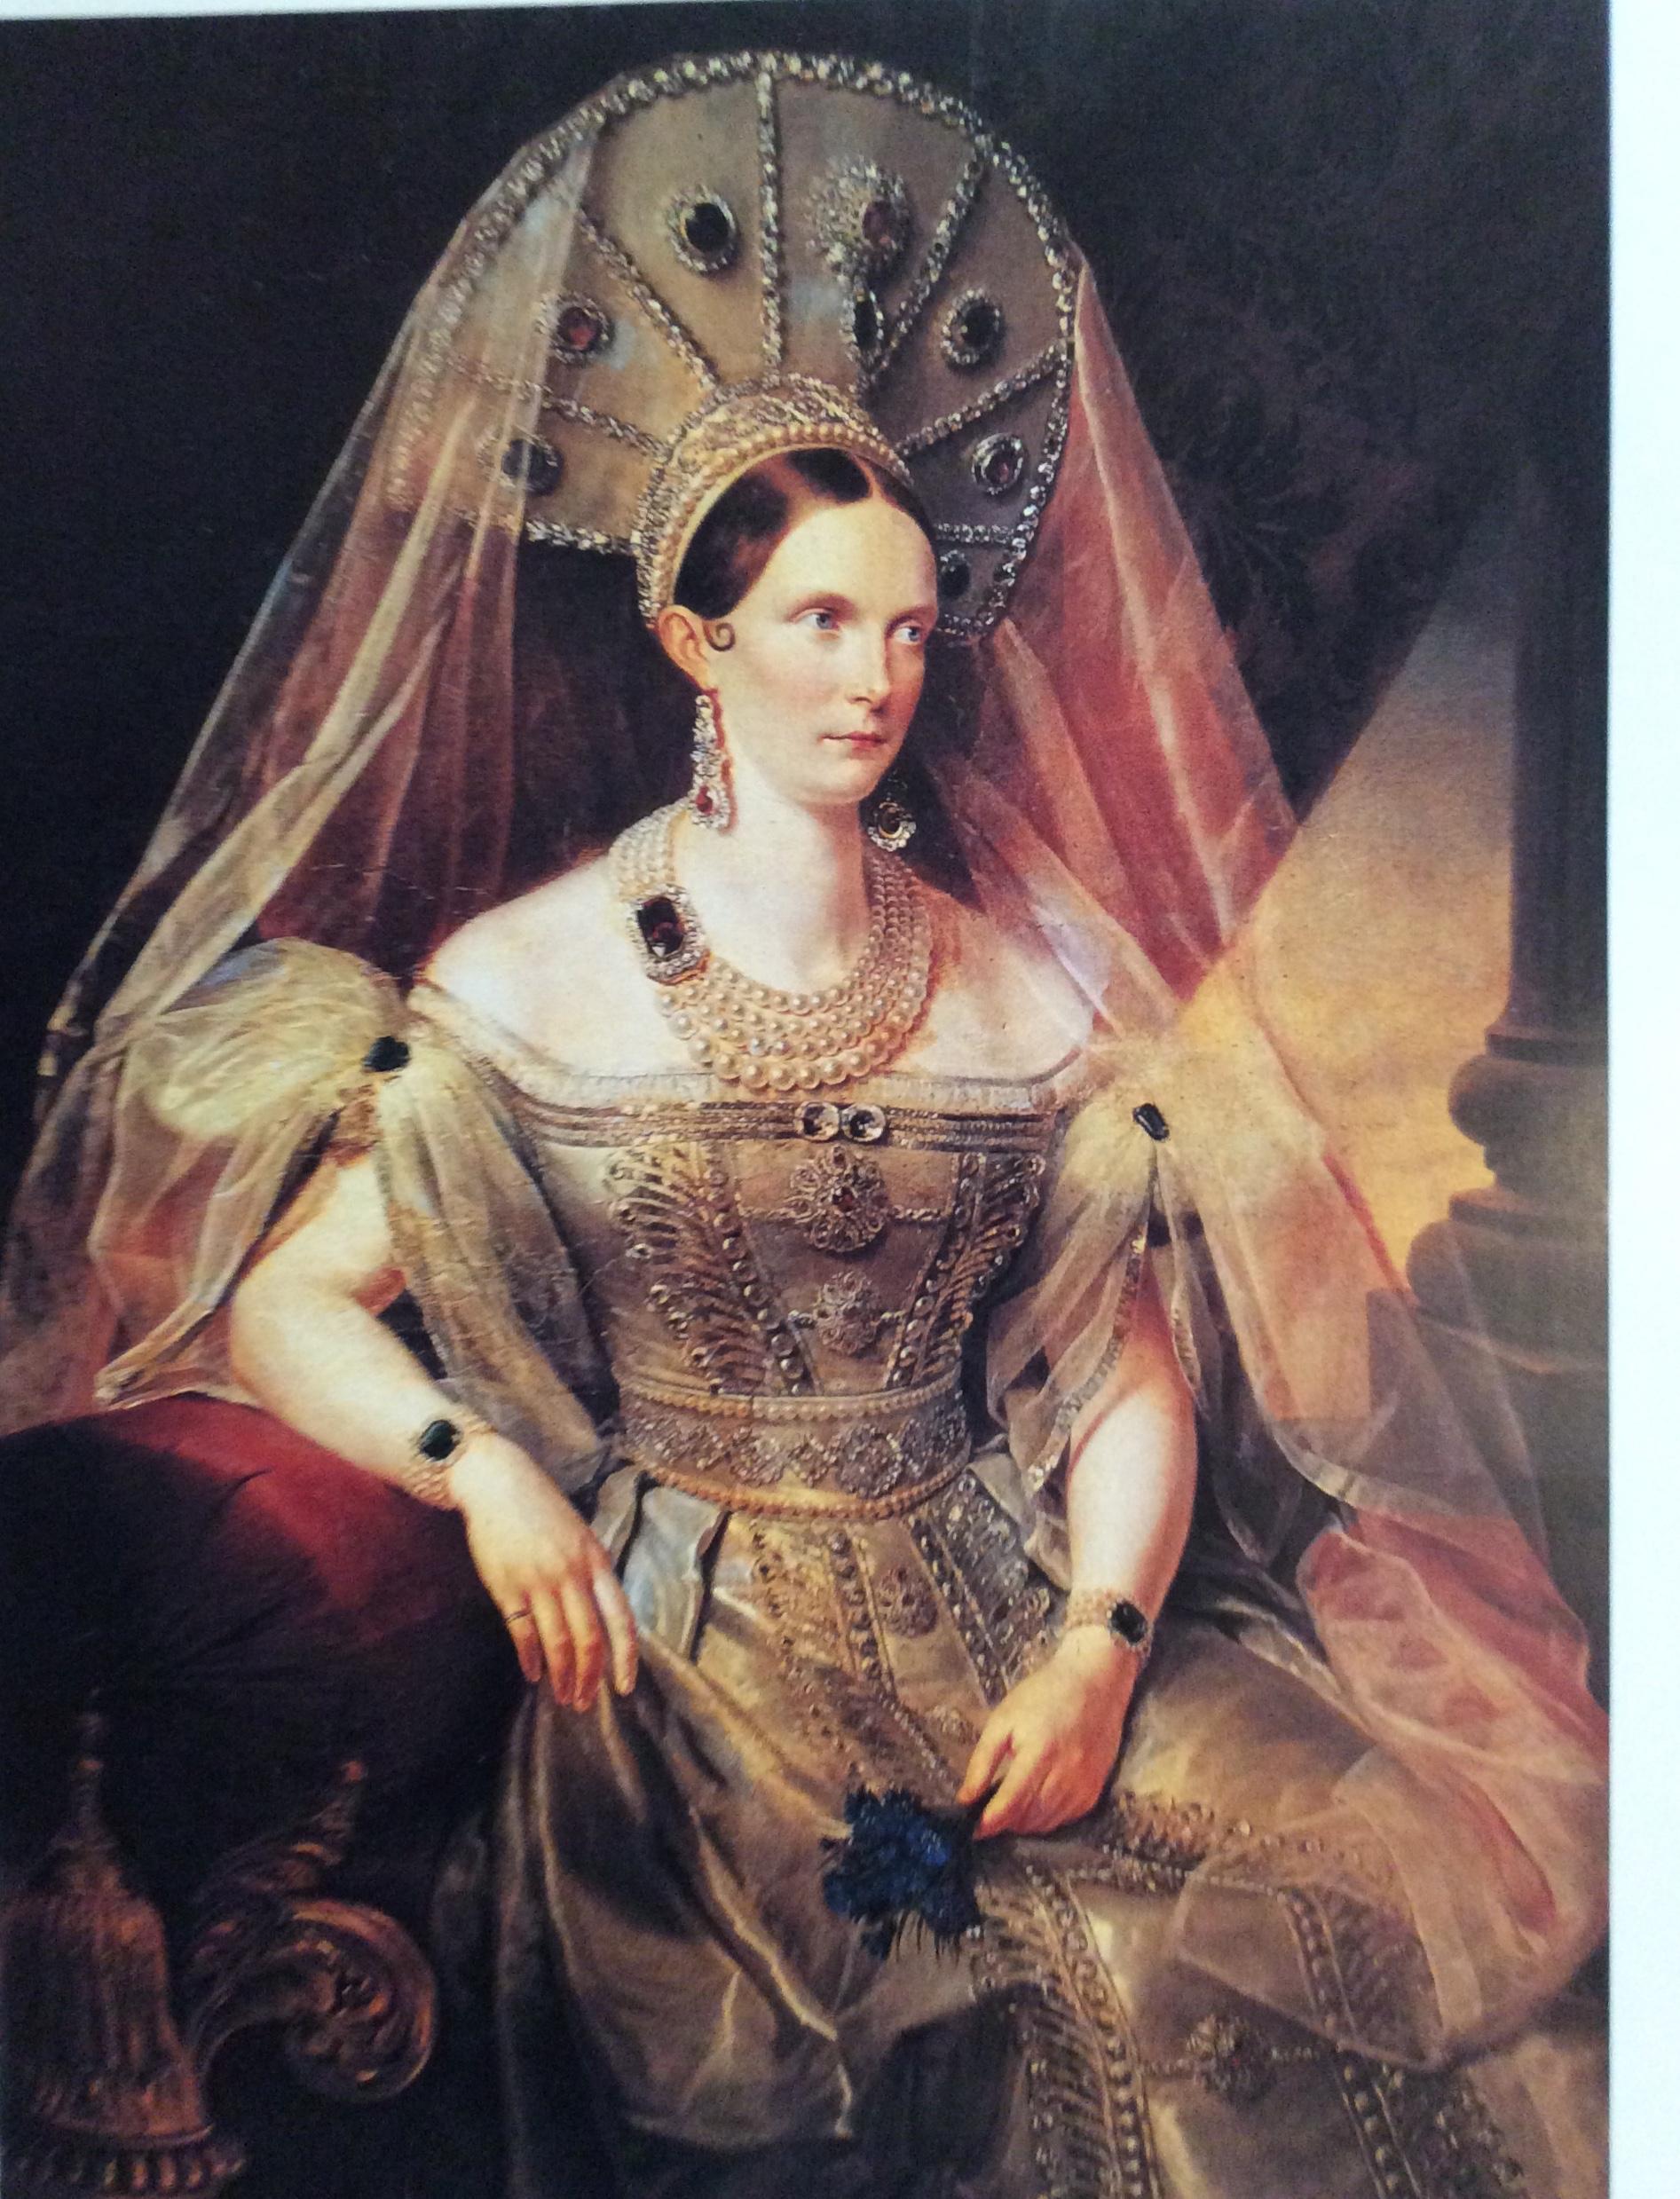 Original exhibition poster paying tribute to Russian Princess Alexandra Feodorovna, 1996. 
This is an absolutely beautiful poster, in honor of a woman of historical importance.

Alexandra Feodorovna was born Victoria Alix Helena Louise Beatrice on